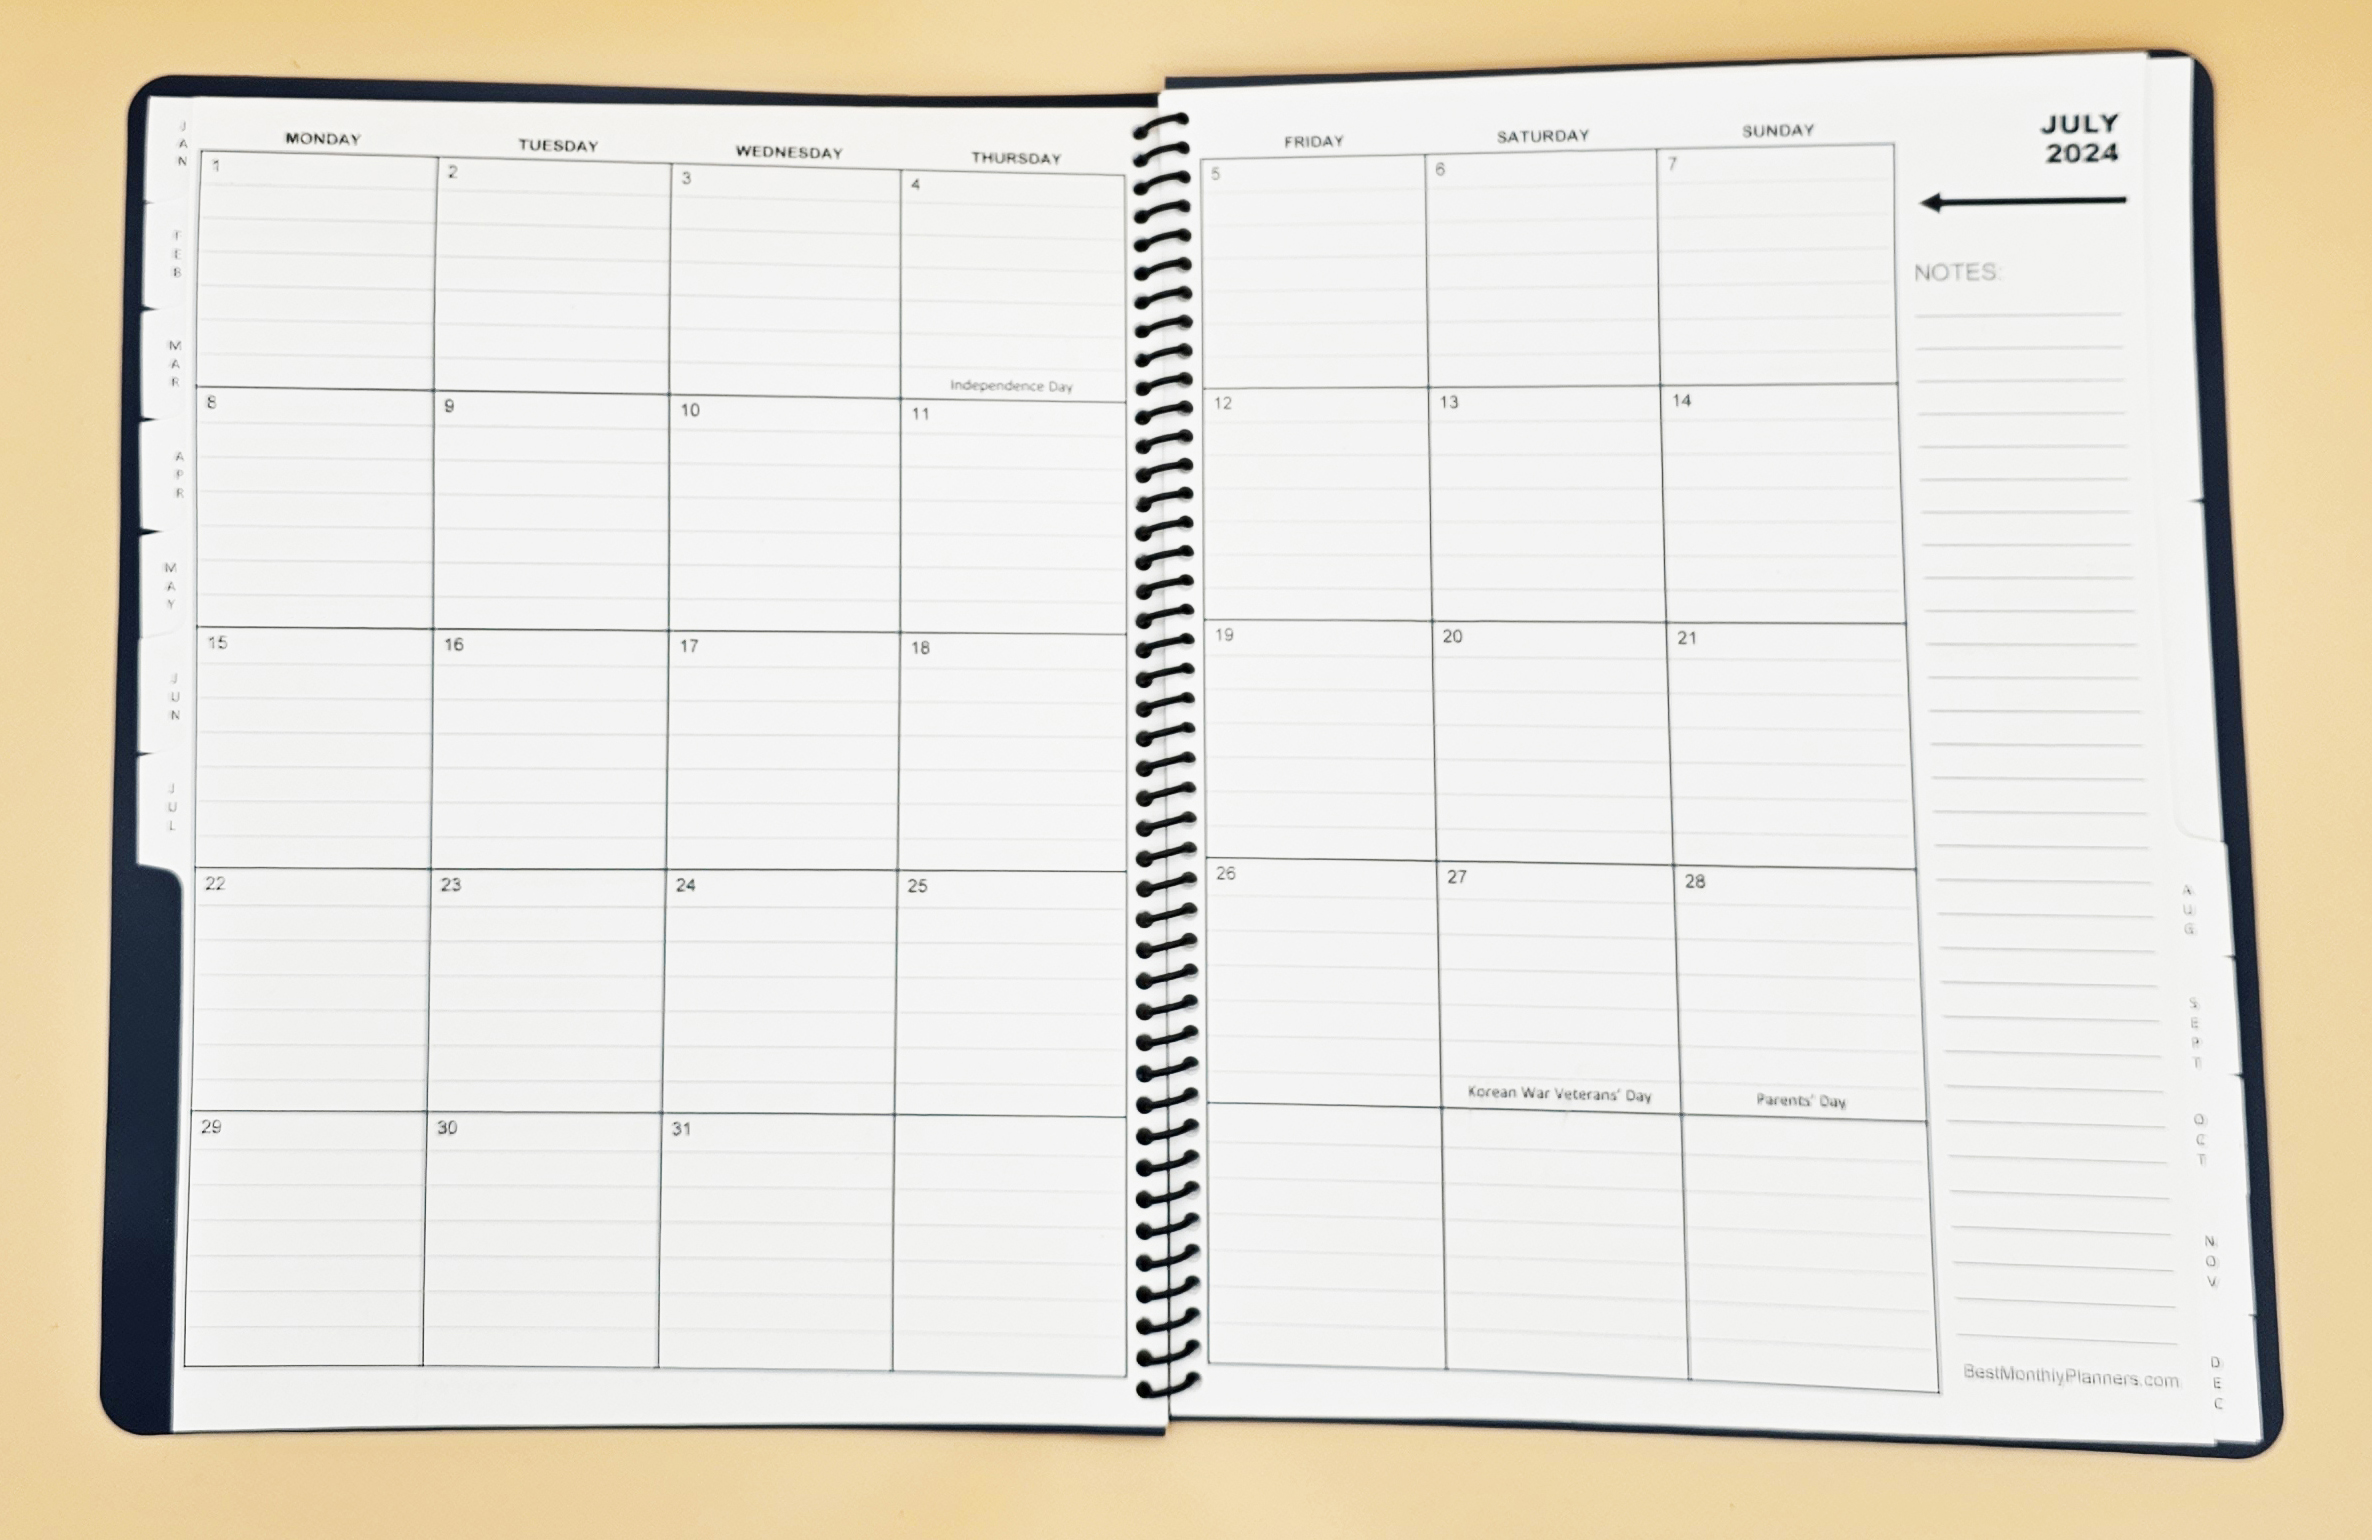 Organizational Monthly Planners for Monday to Sunday Weekly Planning are the best calendars